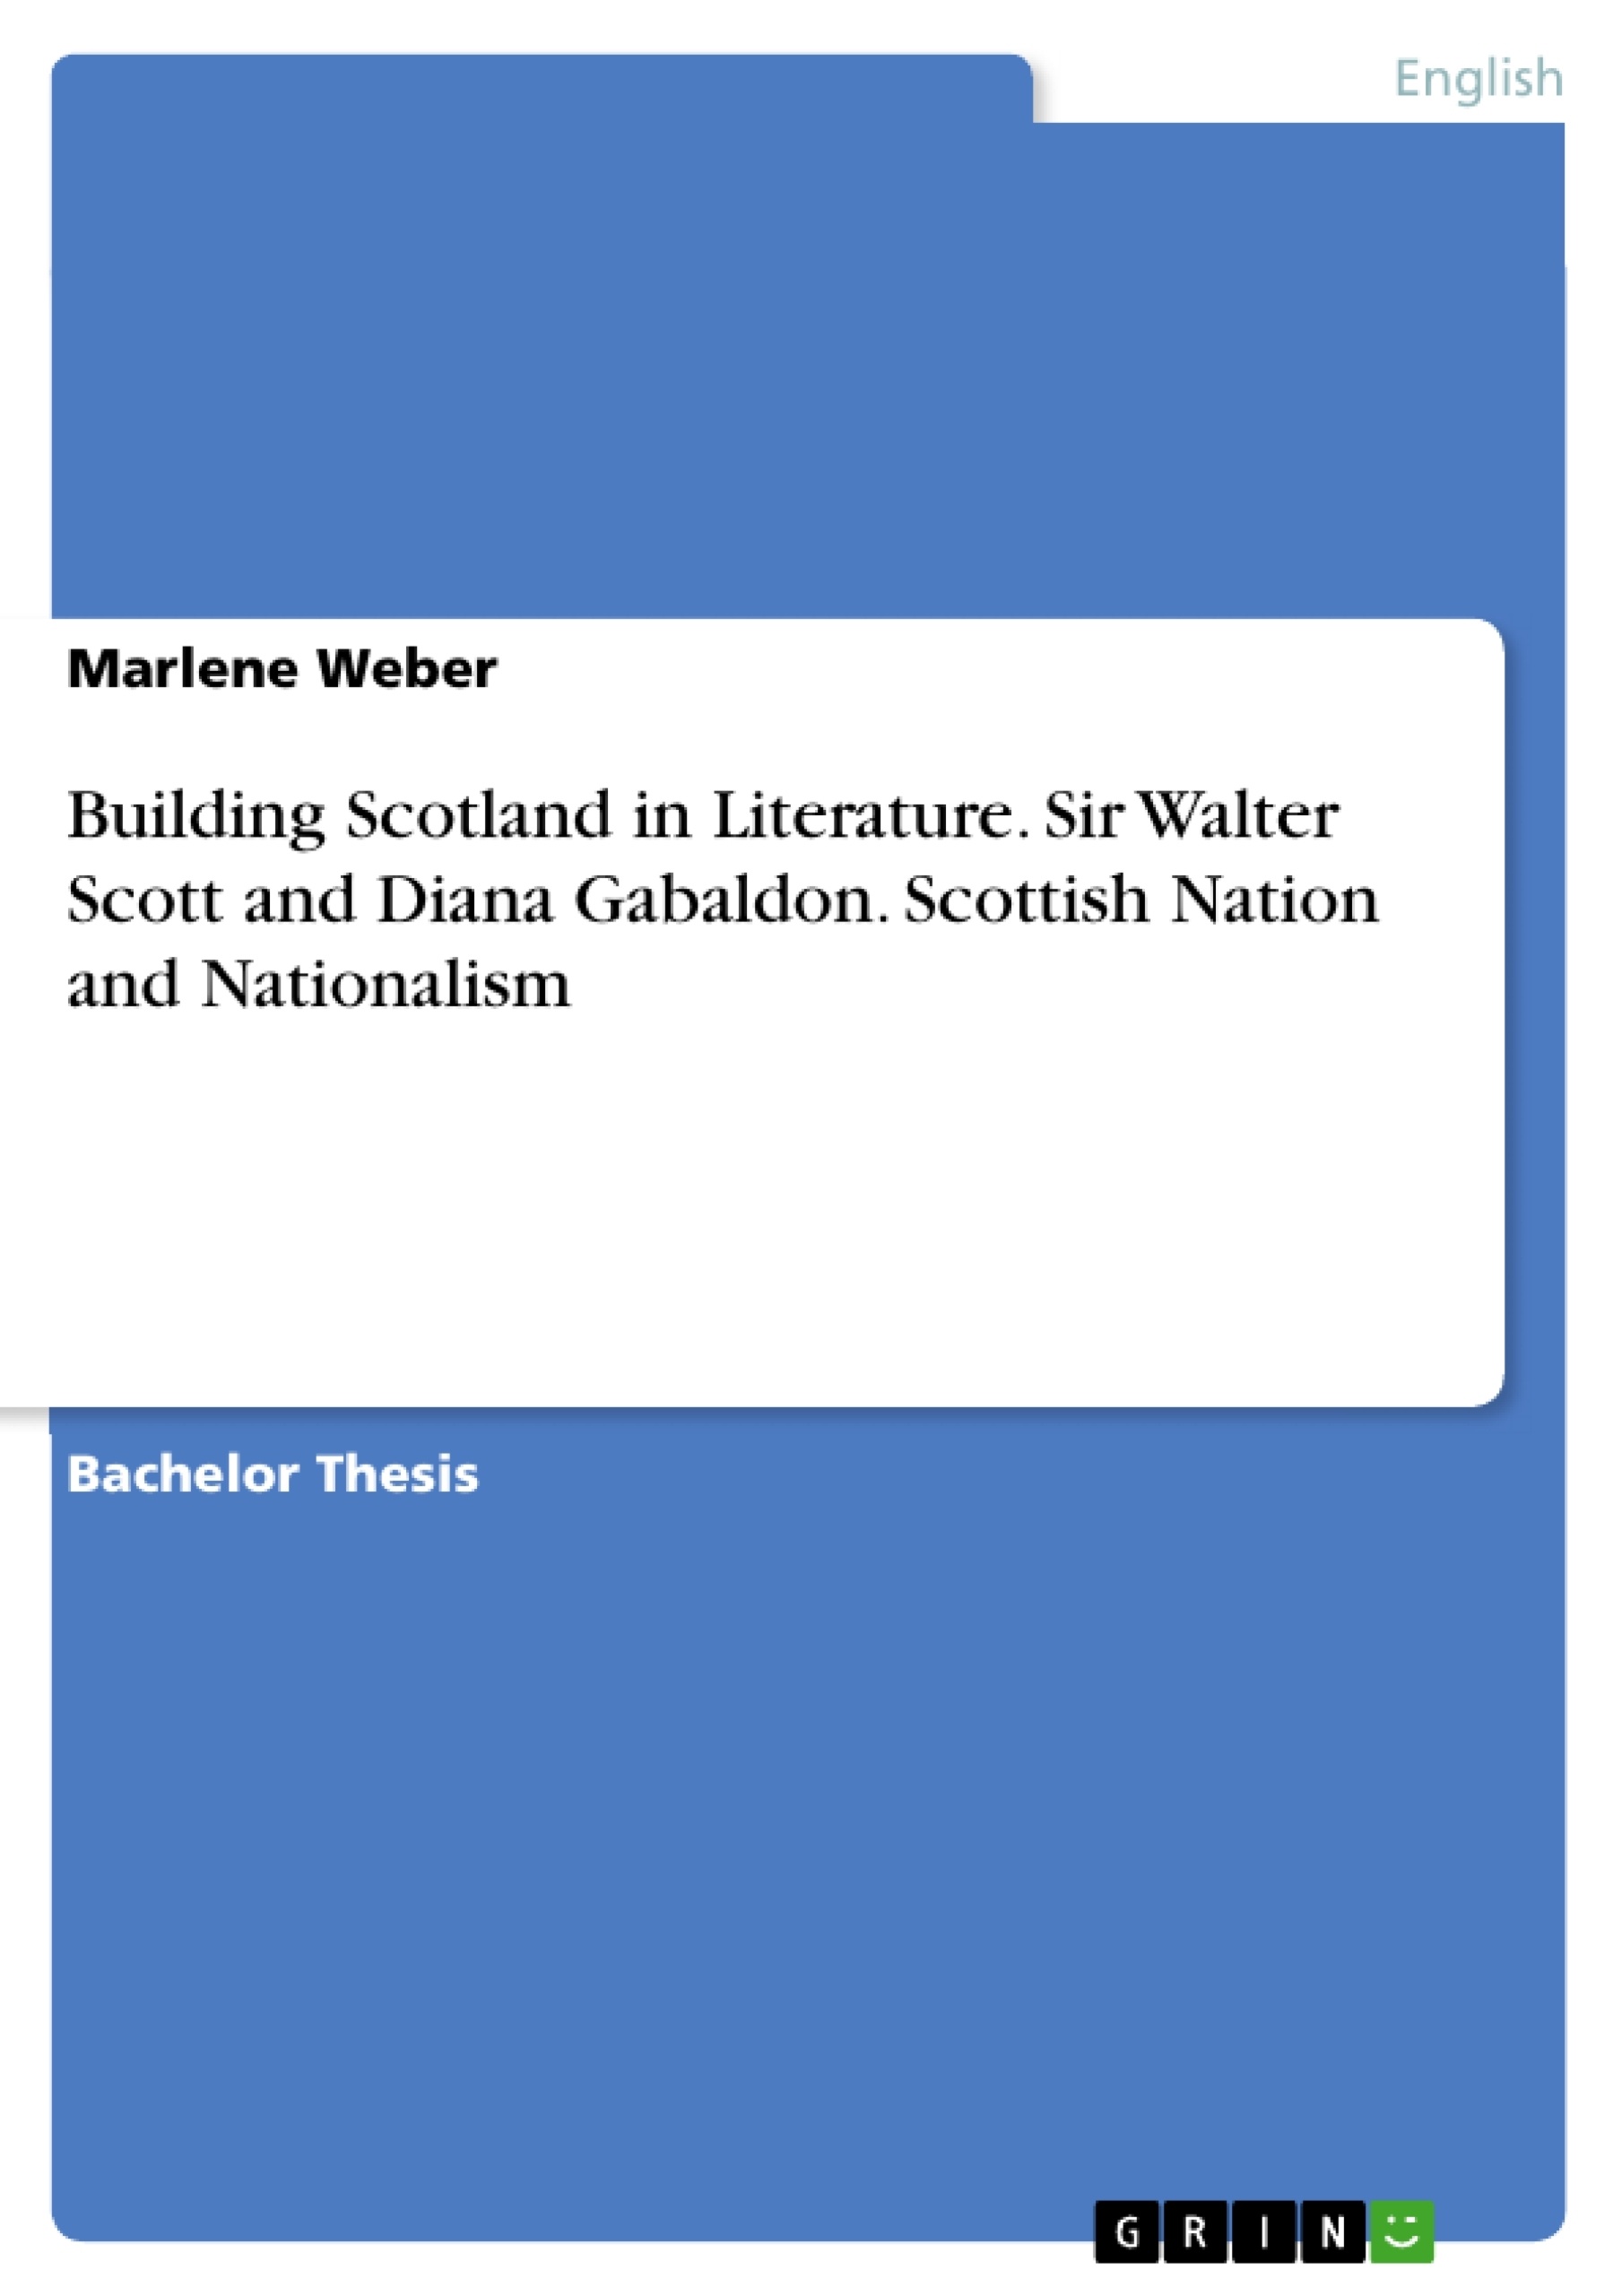 Título: Building Scotland in Literature. Sir Walter Scott and Diana Gabaldon. Scottish Nation and Nationalism